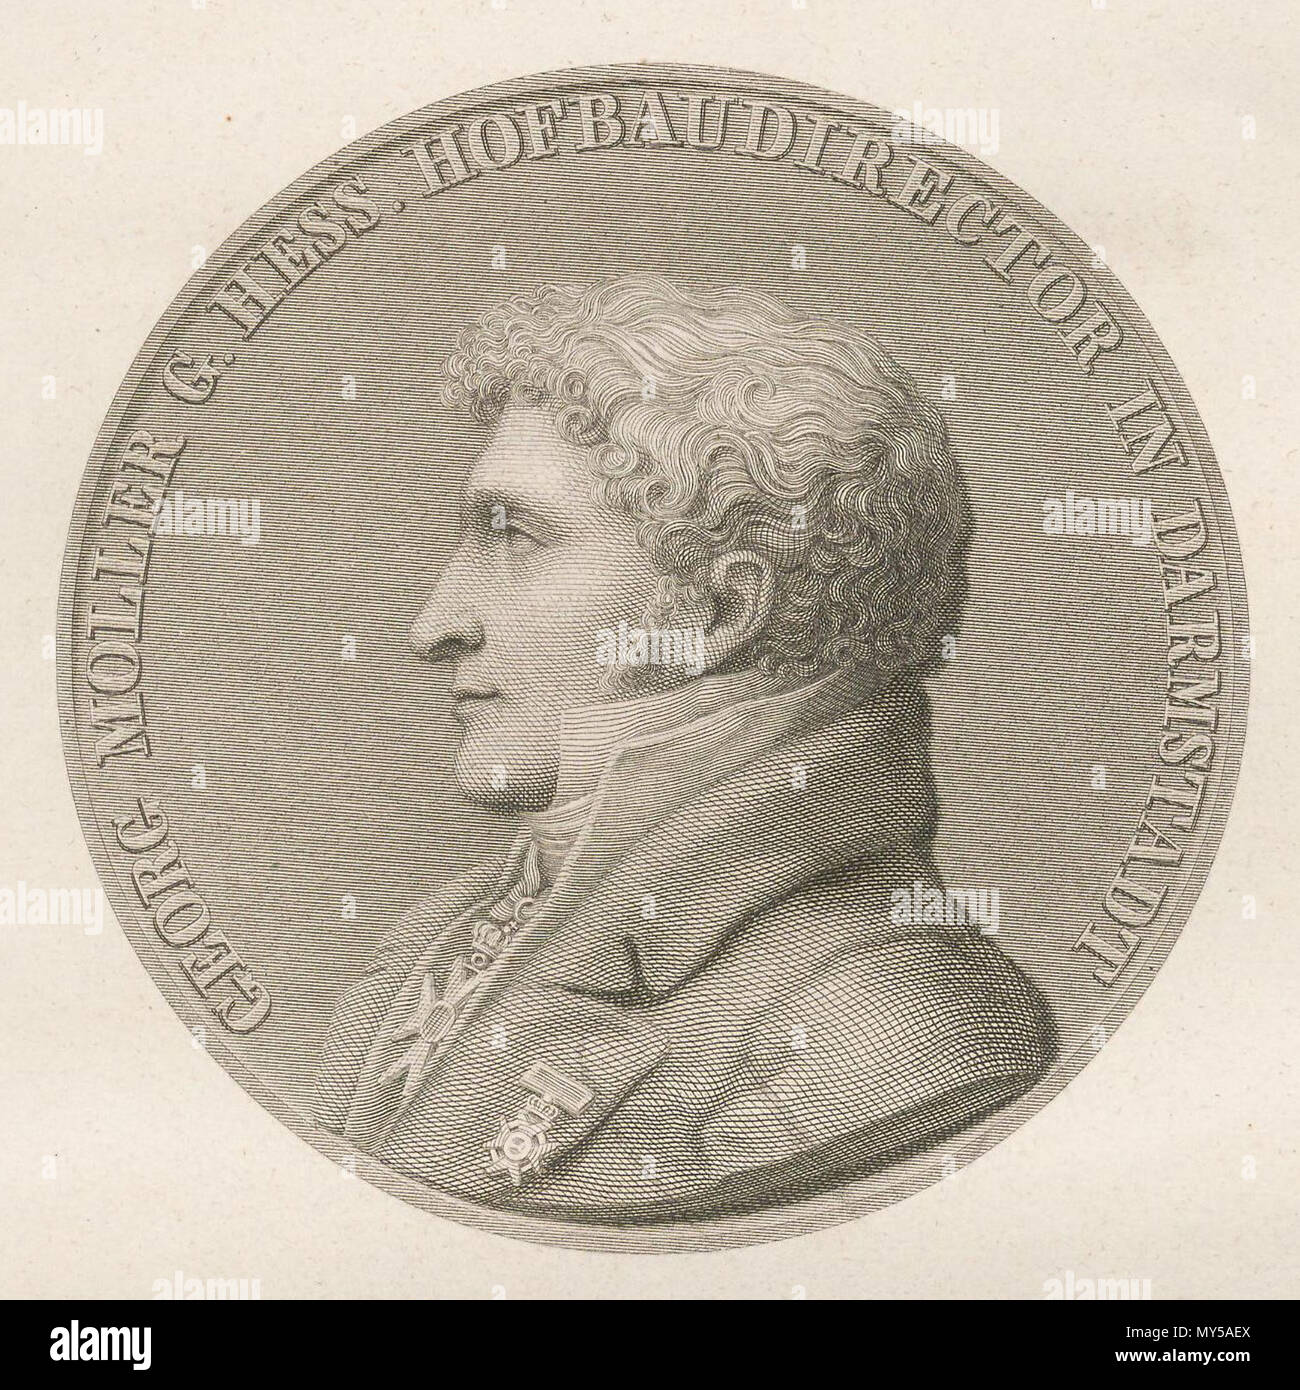 . English: Georg Moller (born January 21, 1784 in Diepholz; died March 13, 1852 in Darmstadt) was a German architect and town planner. before 1852. Unknown 206 Georg Moller circular portrait Stock Photo